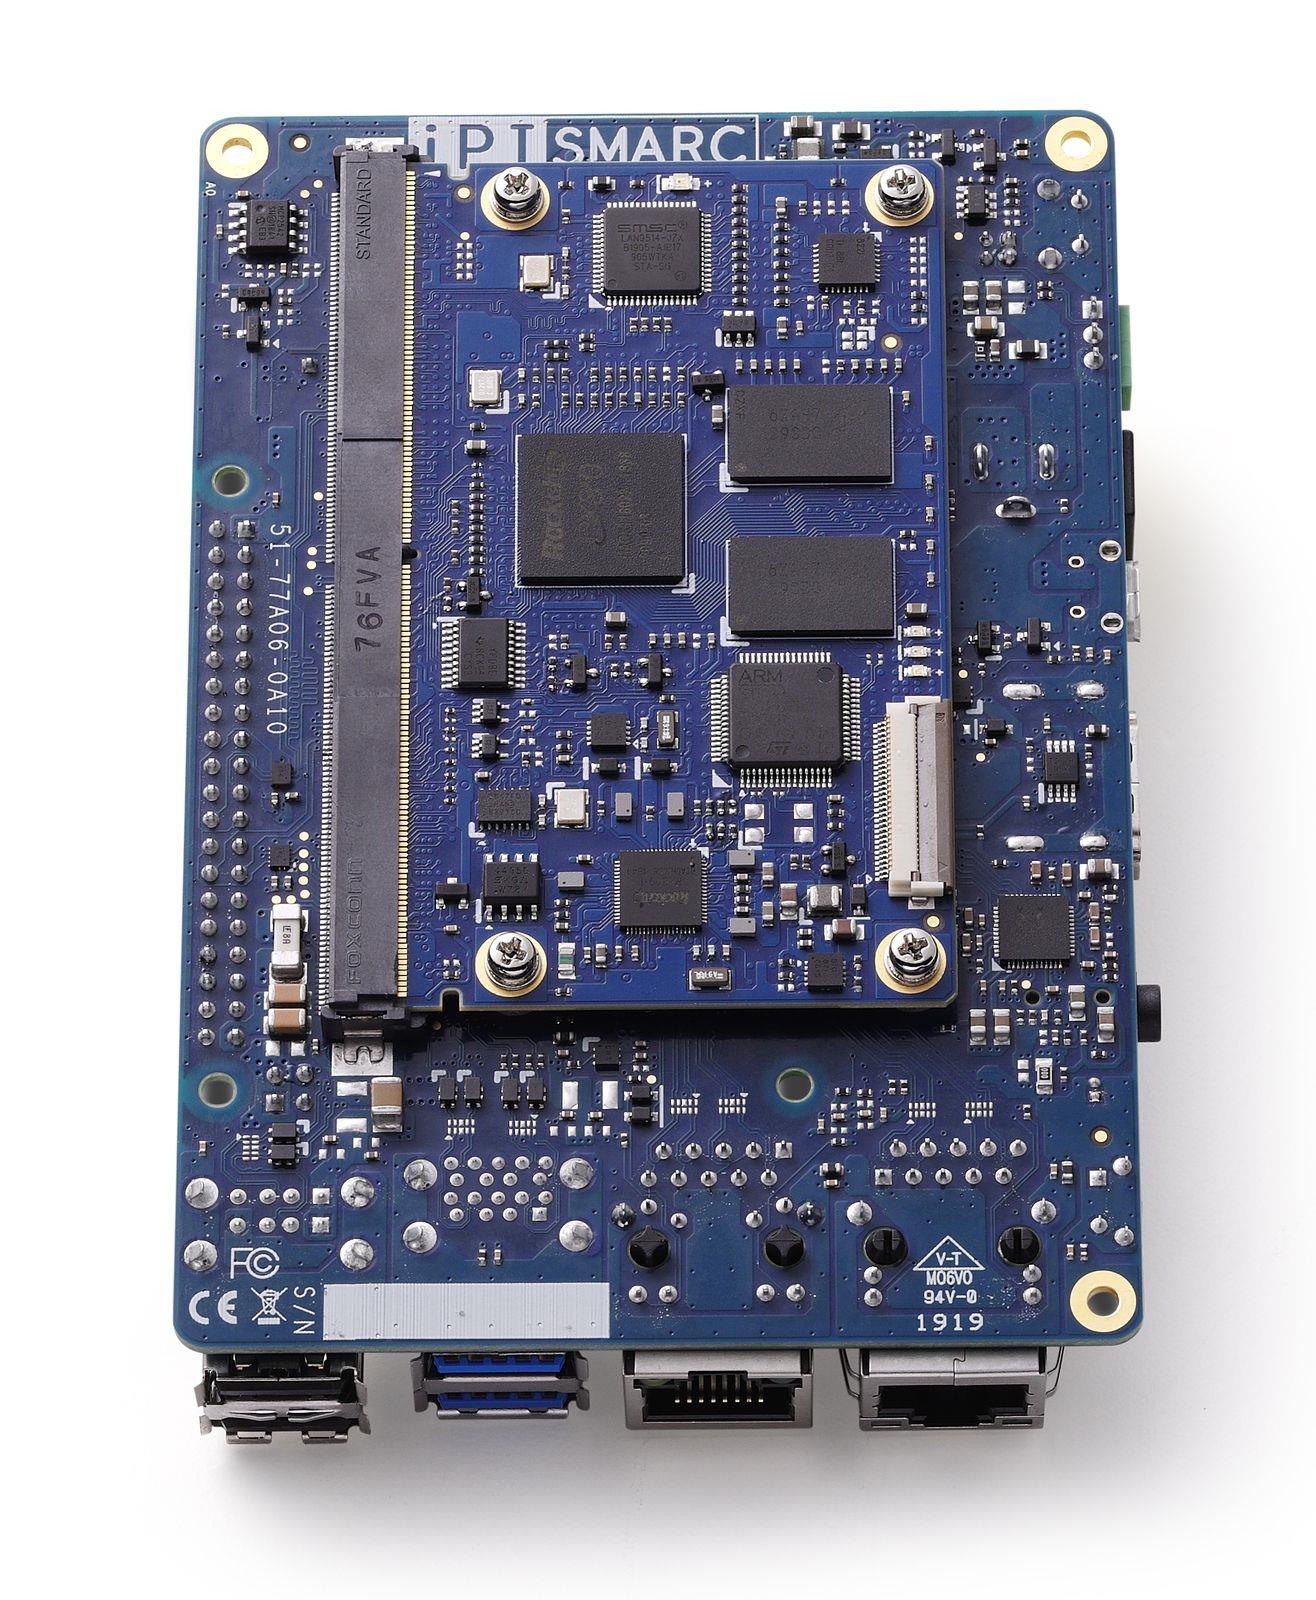 the underside of ADLINK&rsquo;s I-Pi carrier and SMARC processing module<br />Figure 3: Shown is the underside of ADLINK’s I-Pi carrier and SMARC processing module. (Image source: ADLINK)